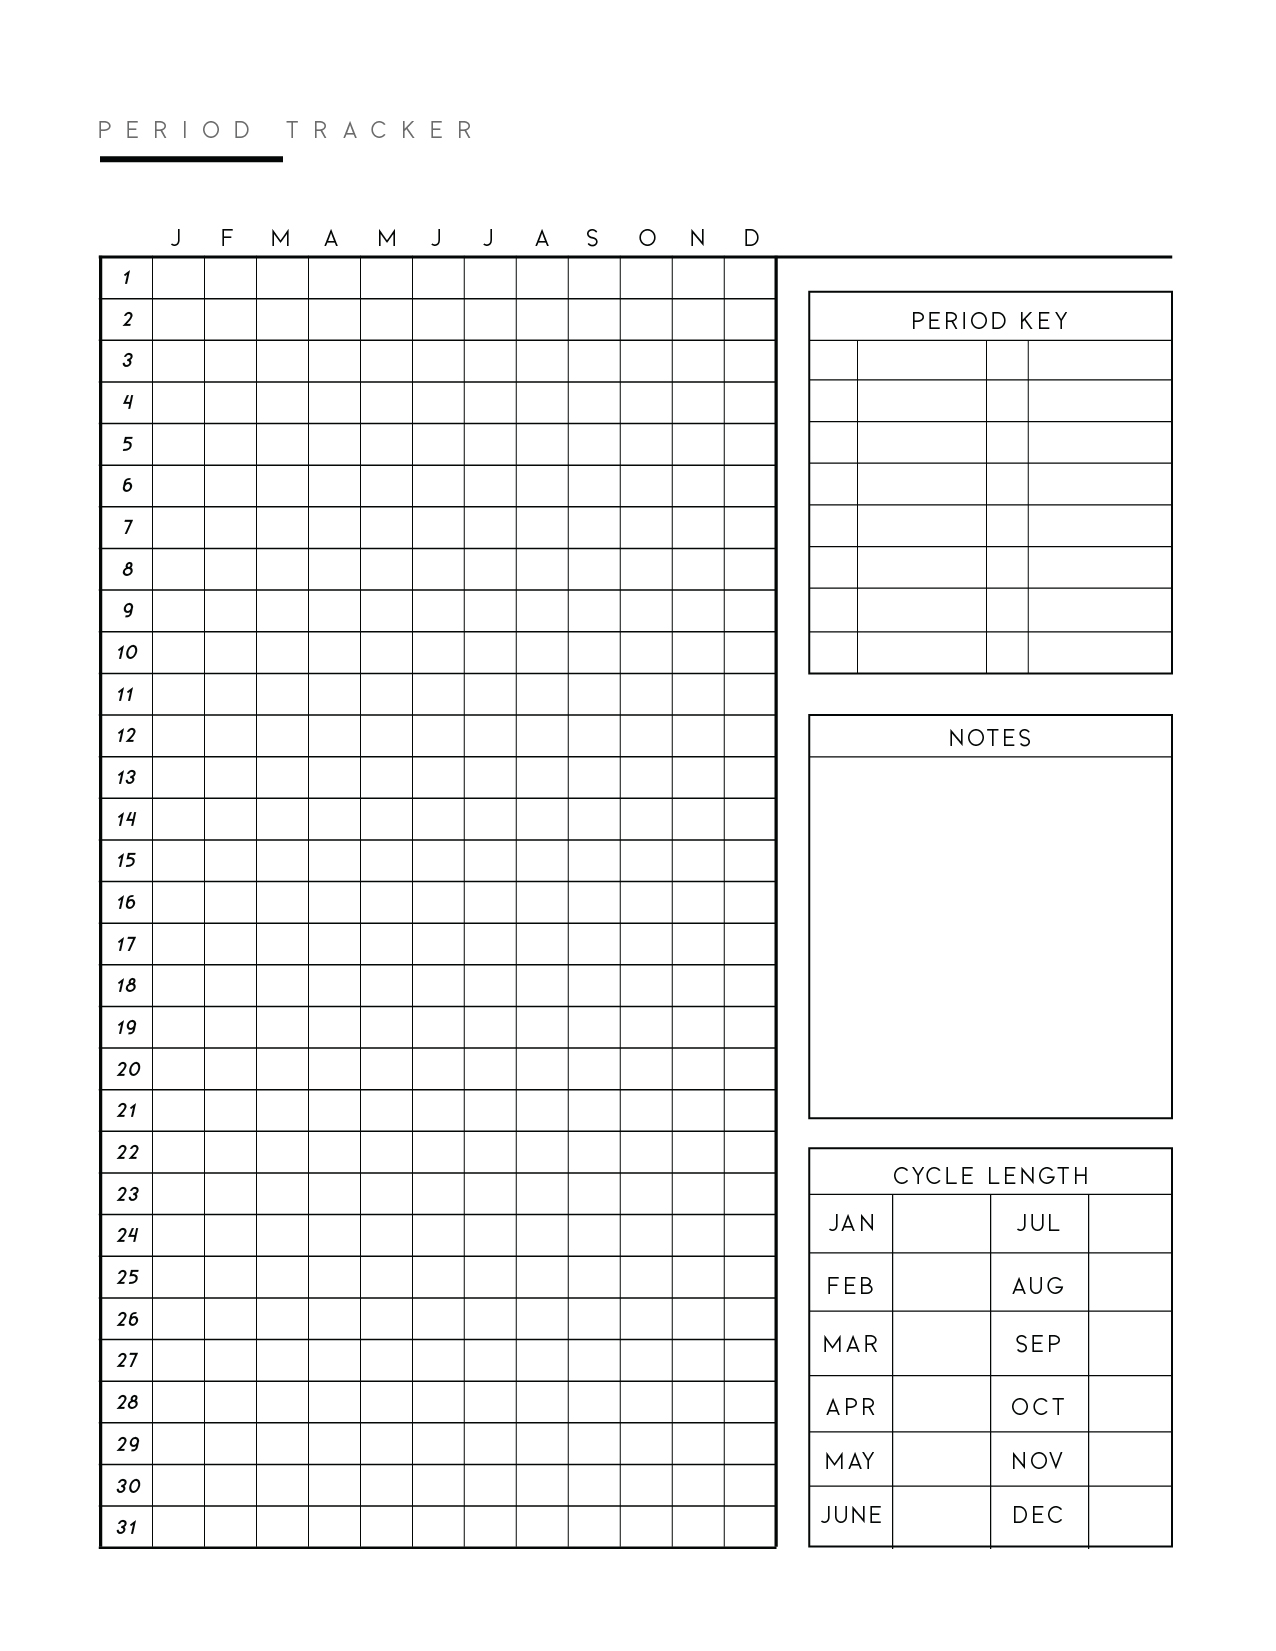 printable-period-tracker-template-world-of-printables